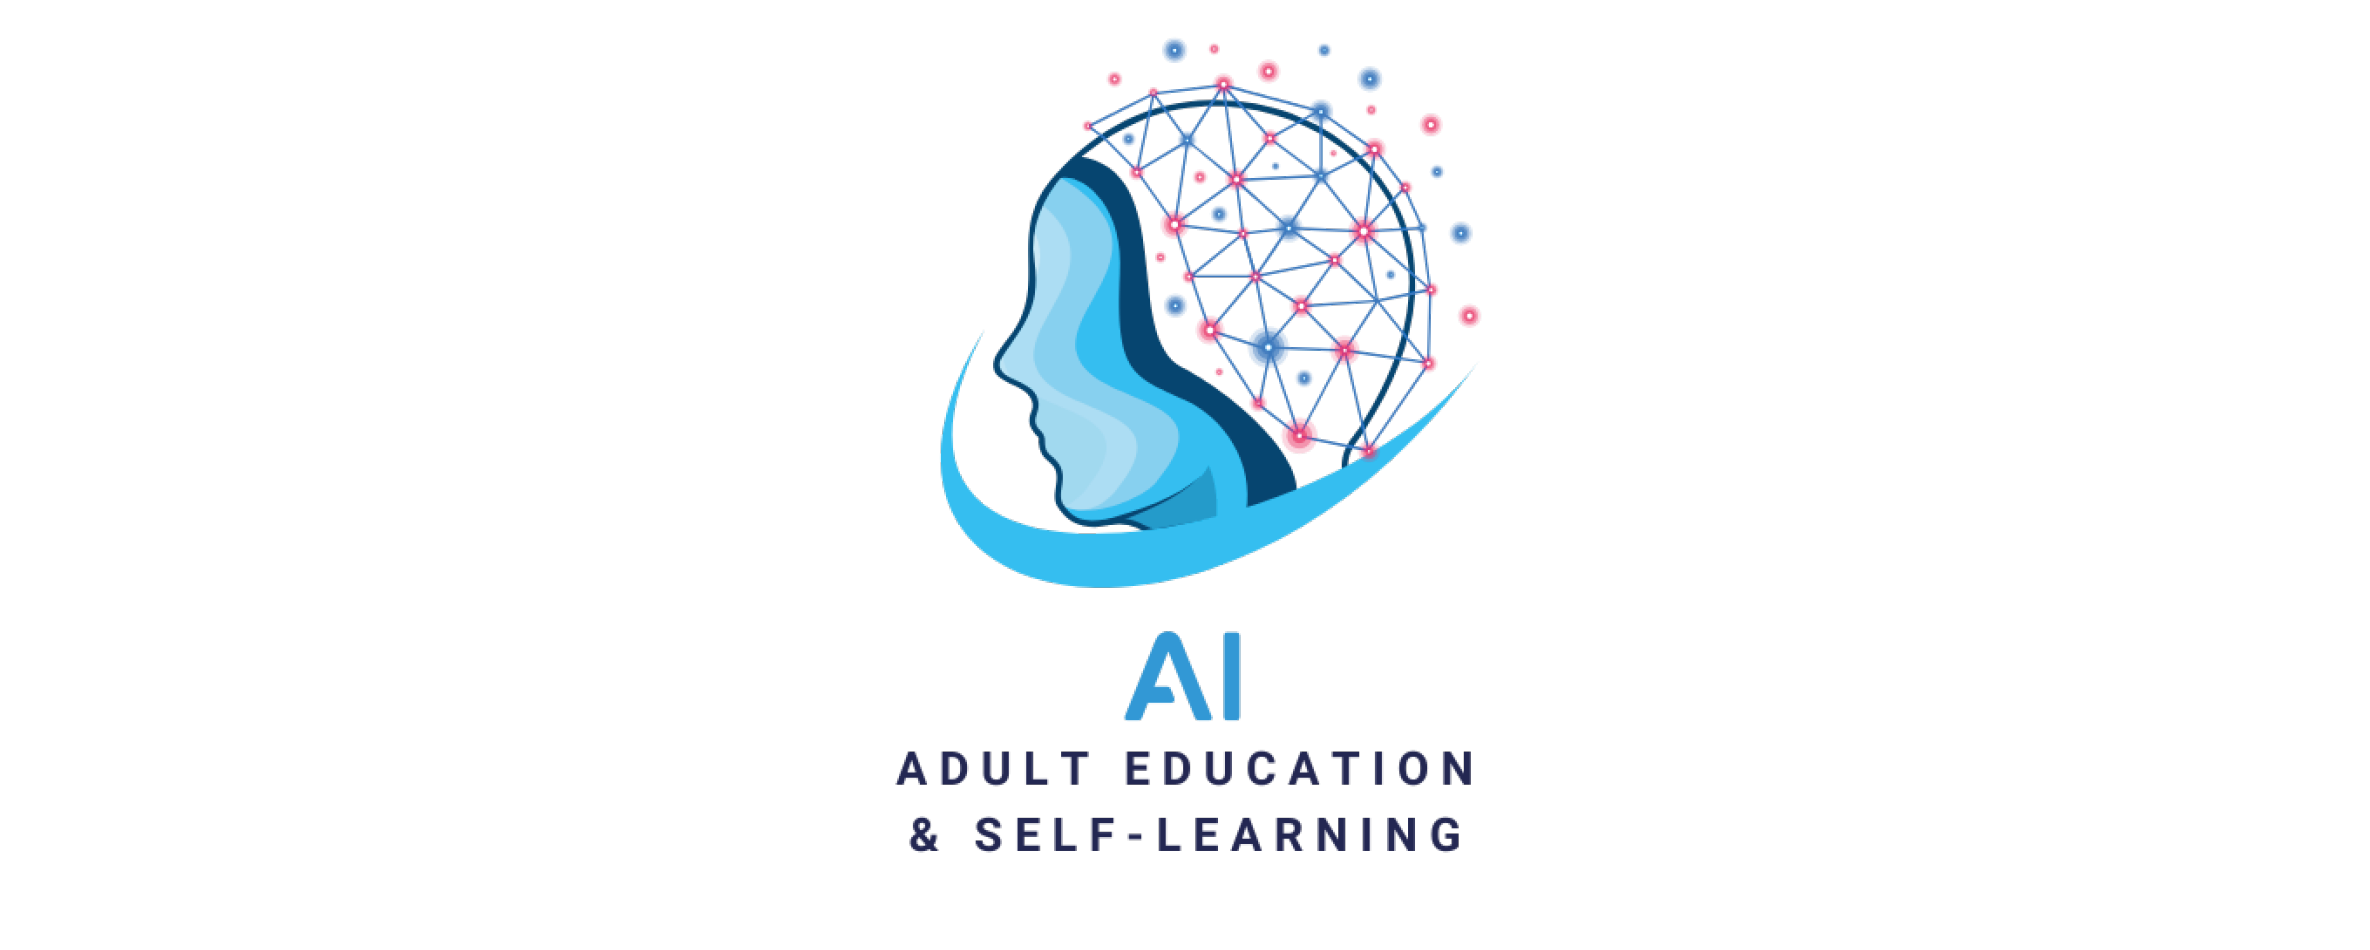 Erasmus + project AI in Adult Education & Self-Learning